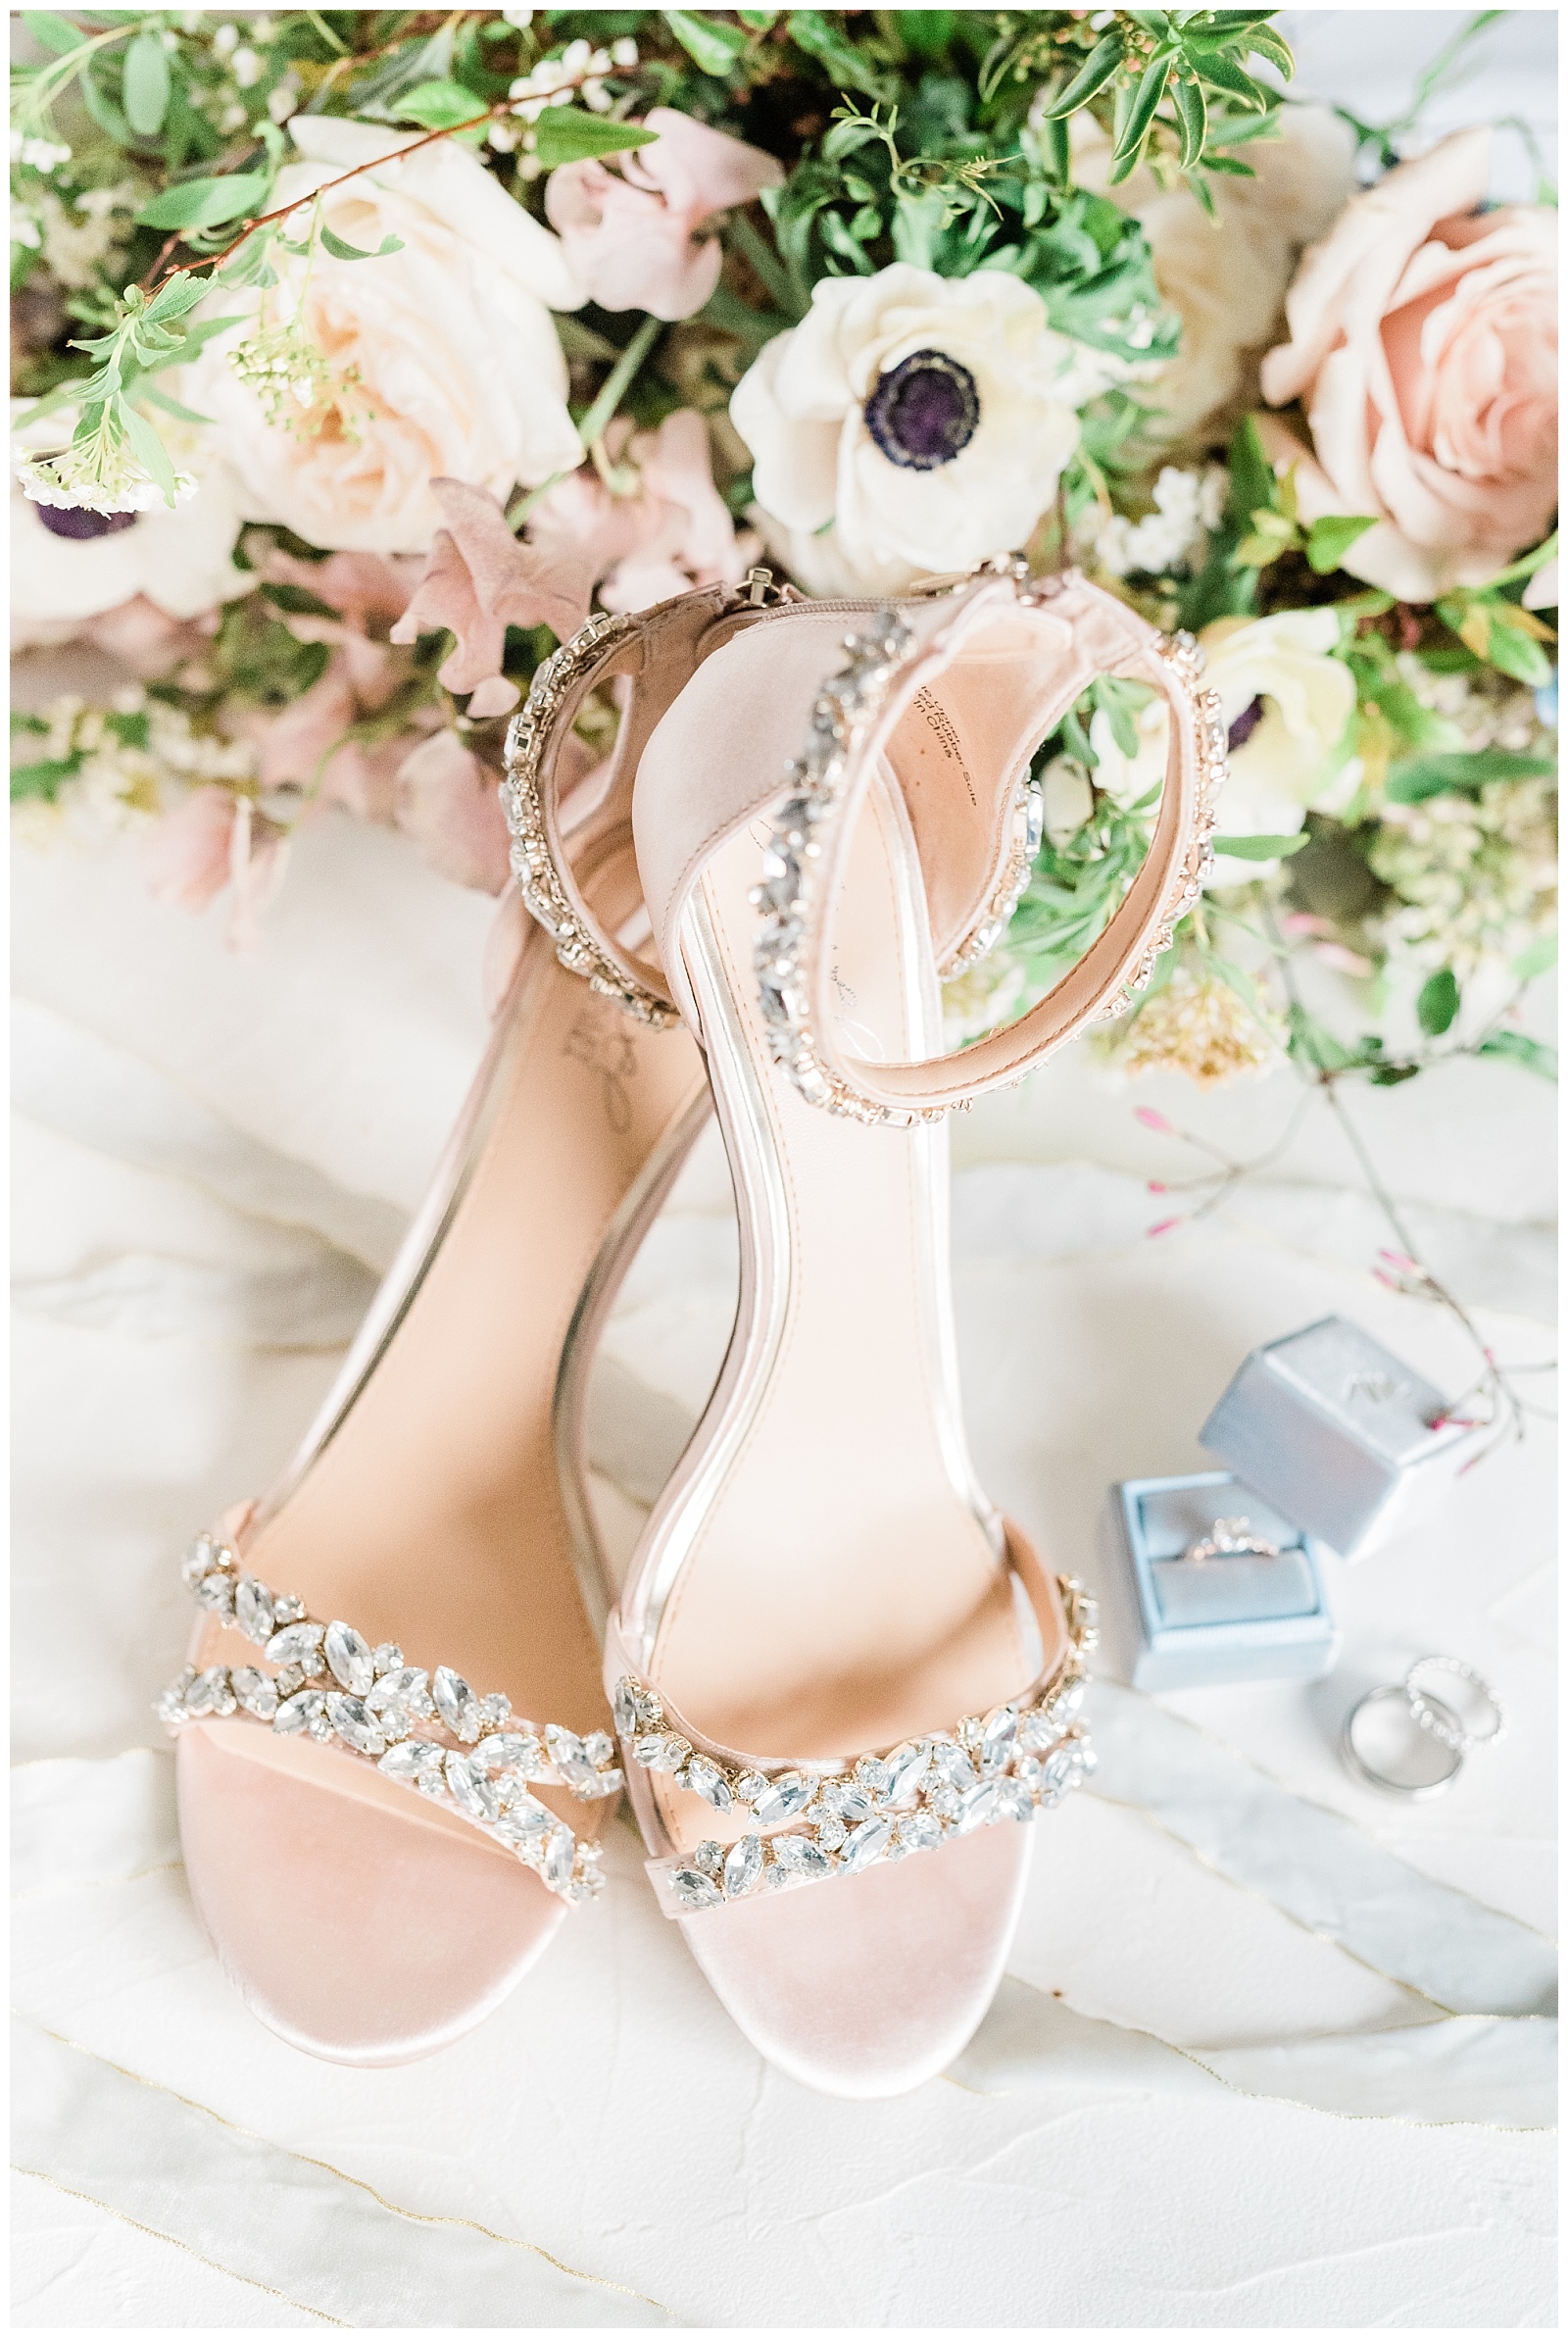 Badgley Mischka shoes styled with wedding rings and a bouquet.